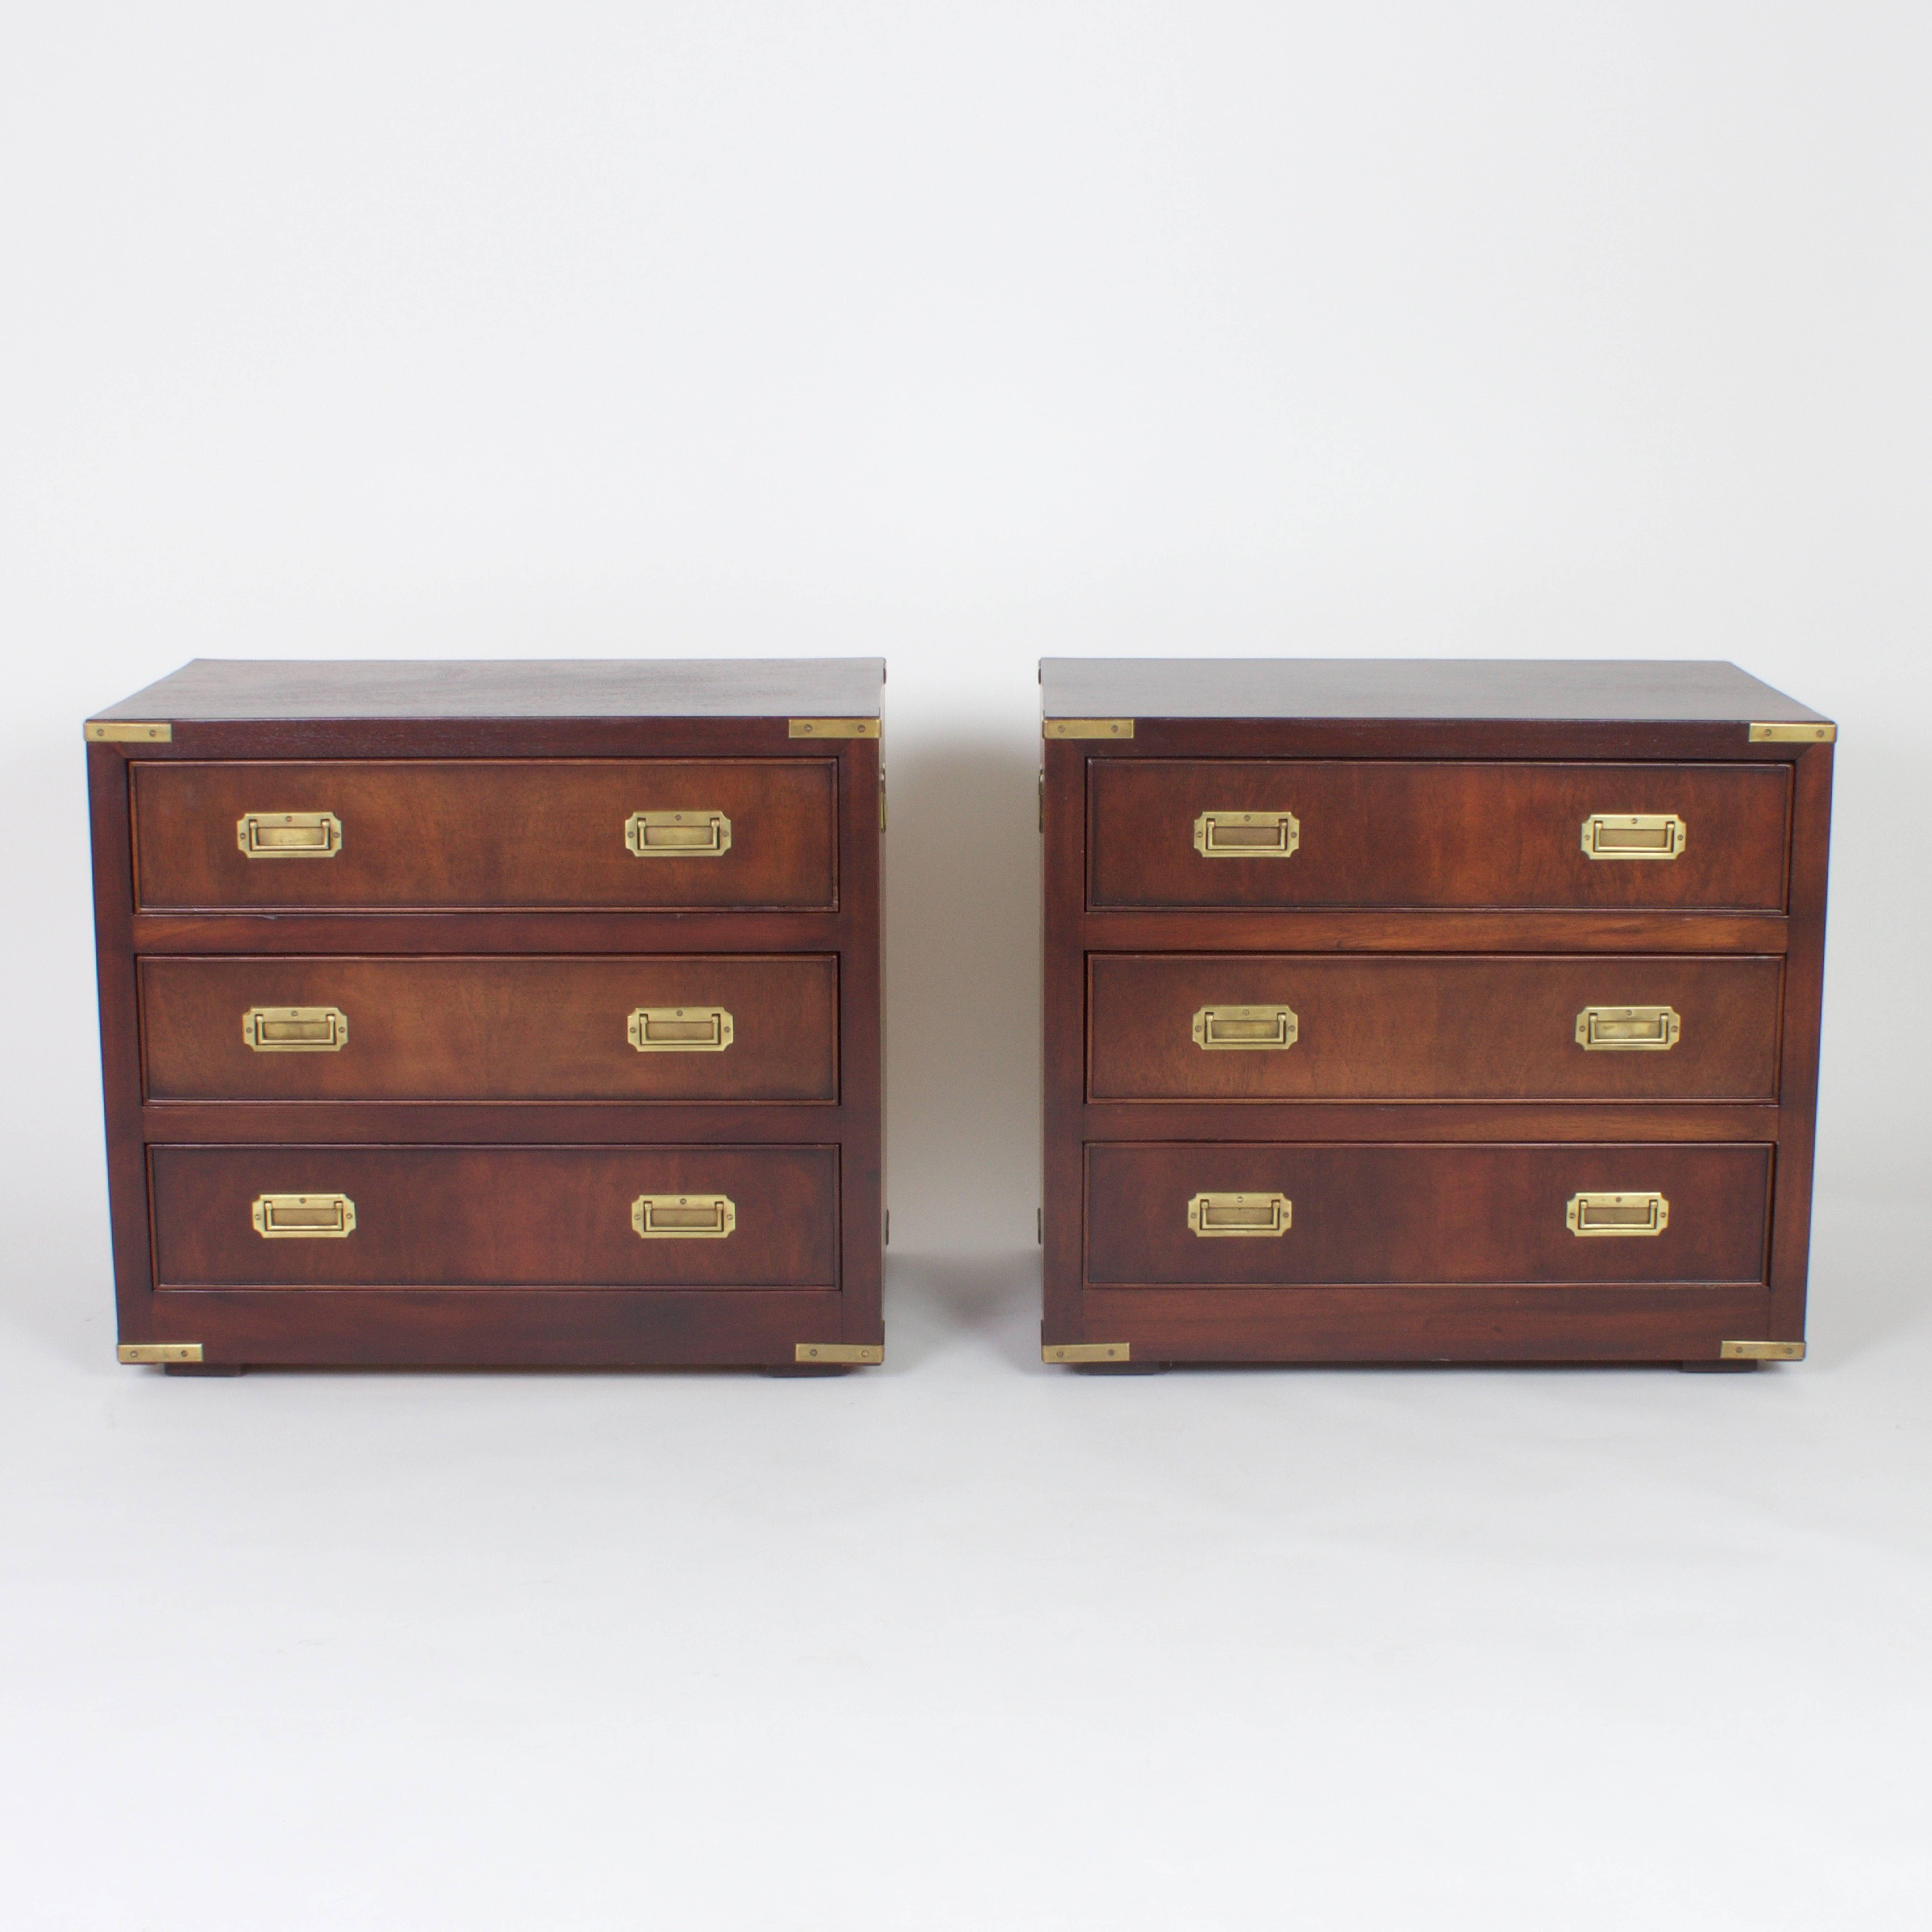 Handsome pair of Ralph Lauren mahogany nightstands with Campaign style hardware, select rich wood grains and yet a modern sensibility. Signed Polo Ralph Lauren in a Drawer.